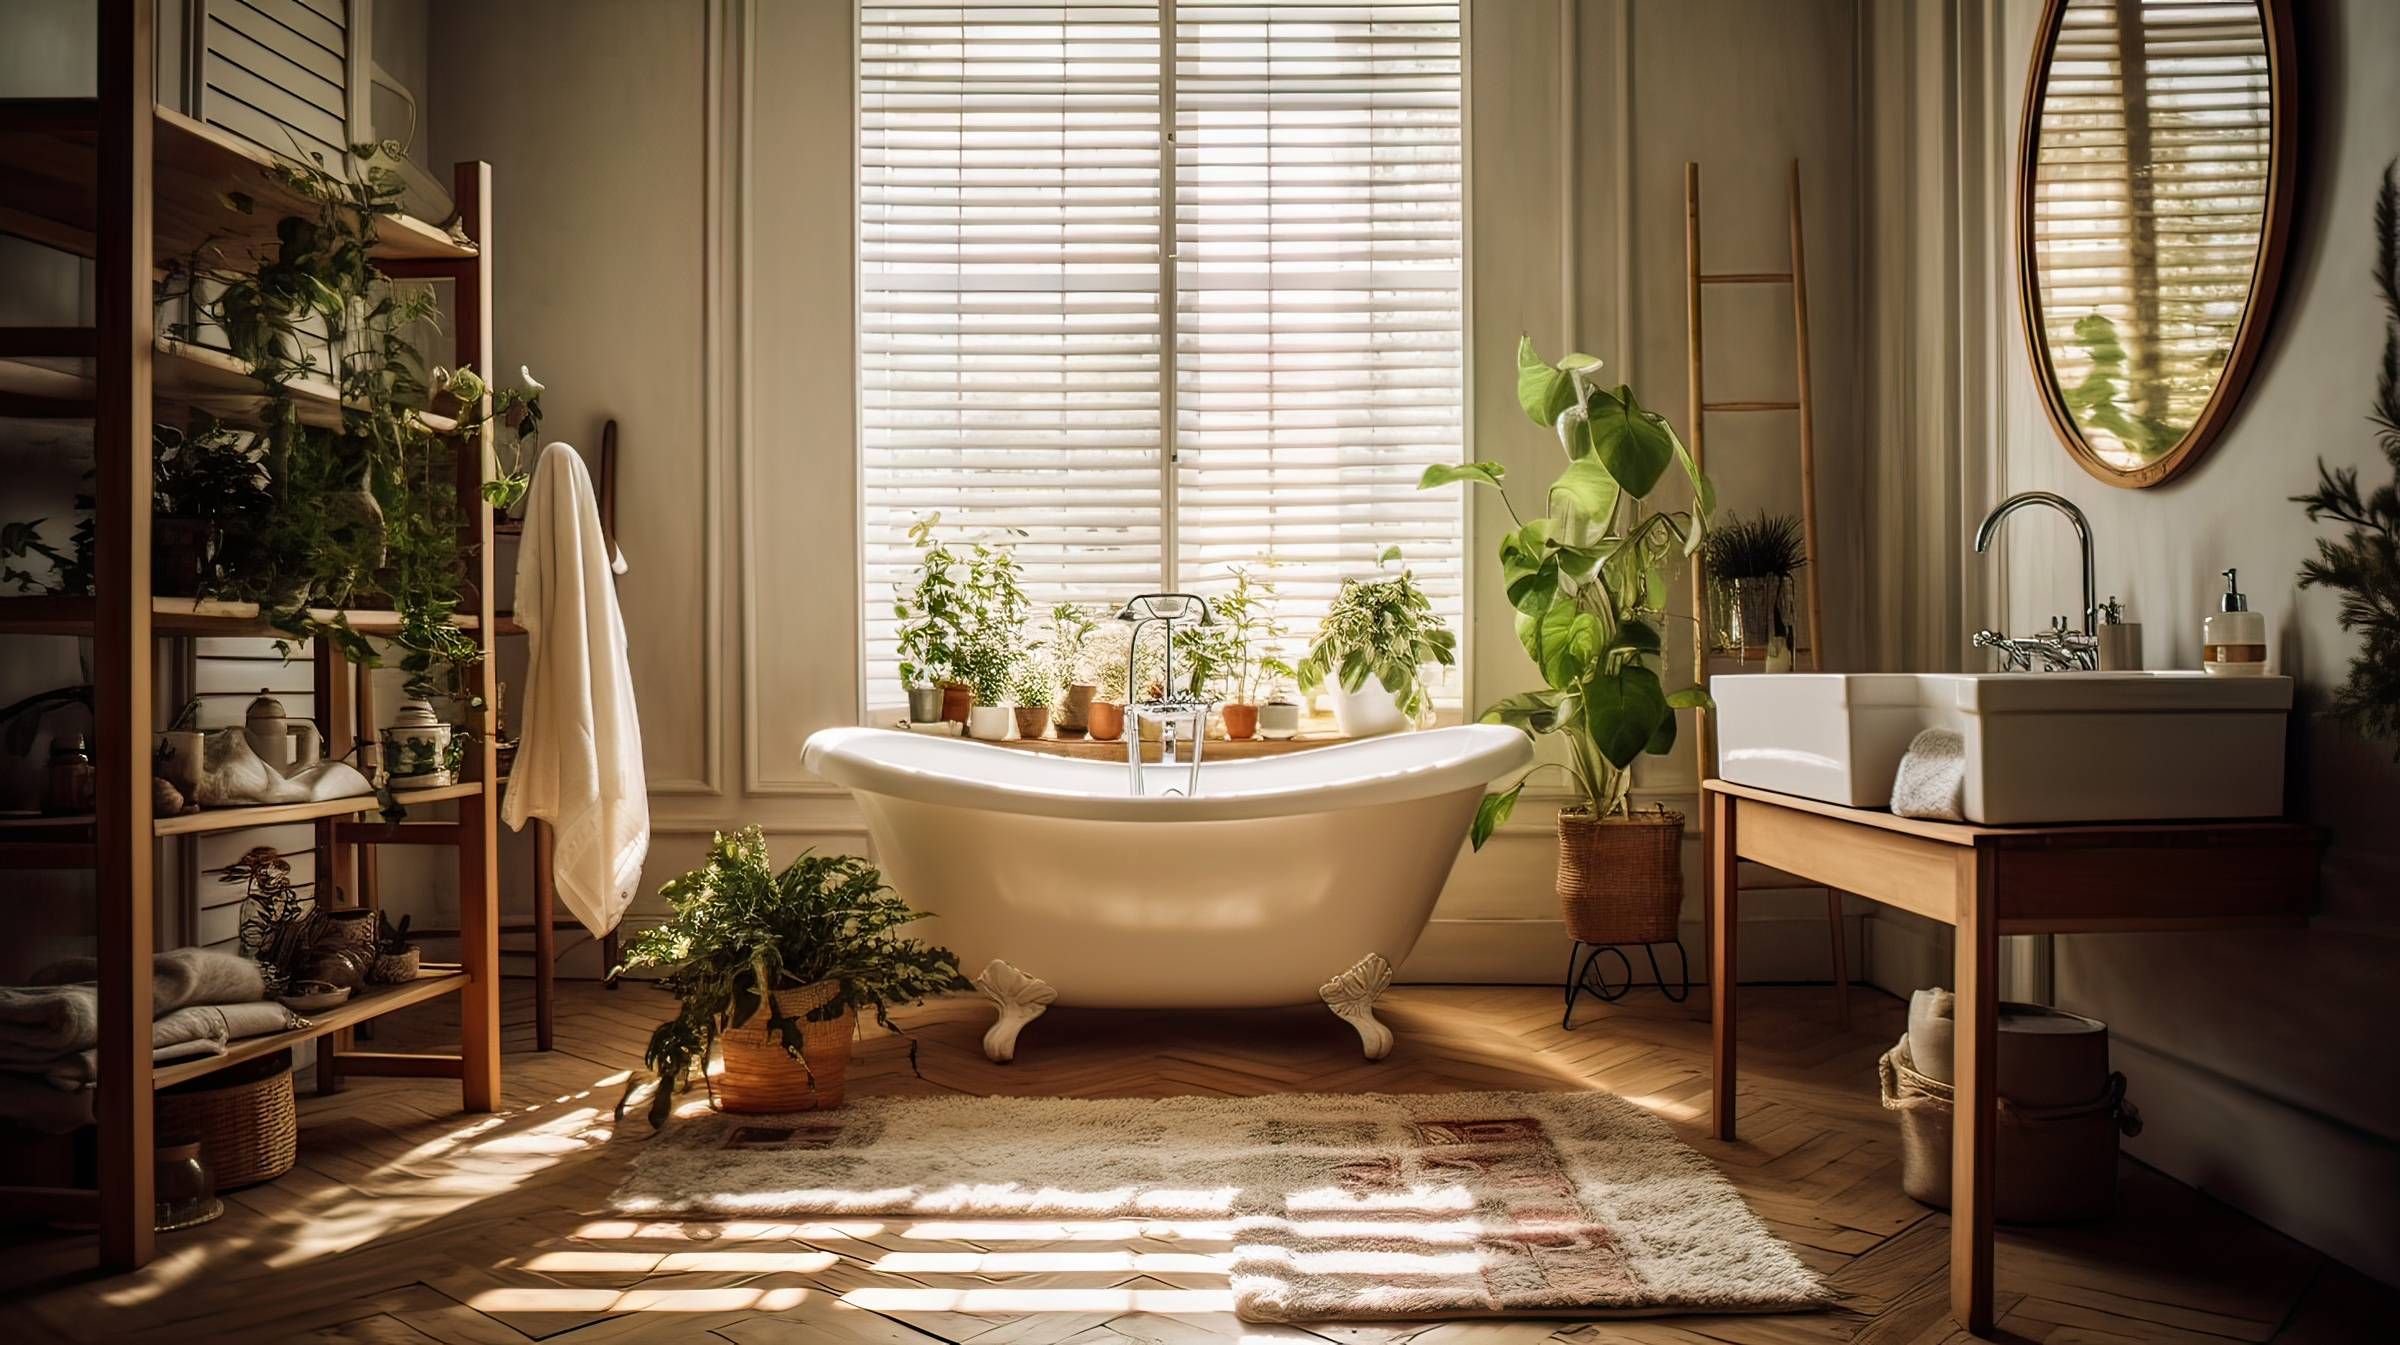 Yucatan by Resi - Luxury Apartment Website Theme - bathroom with elegant bathtub and large window with plants and natural light streaming in